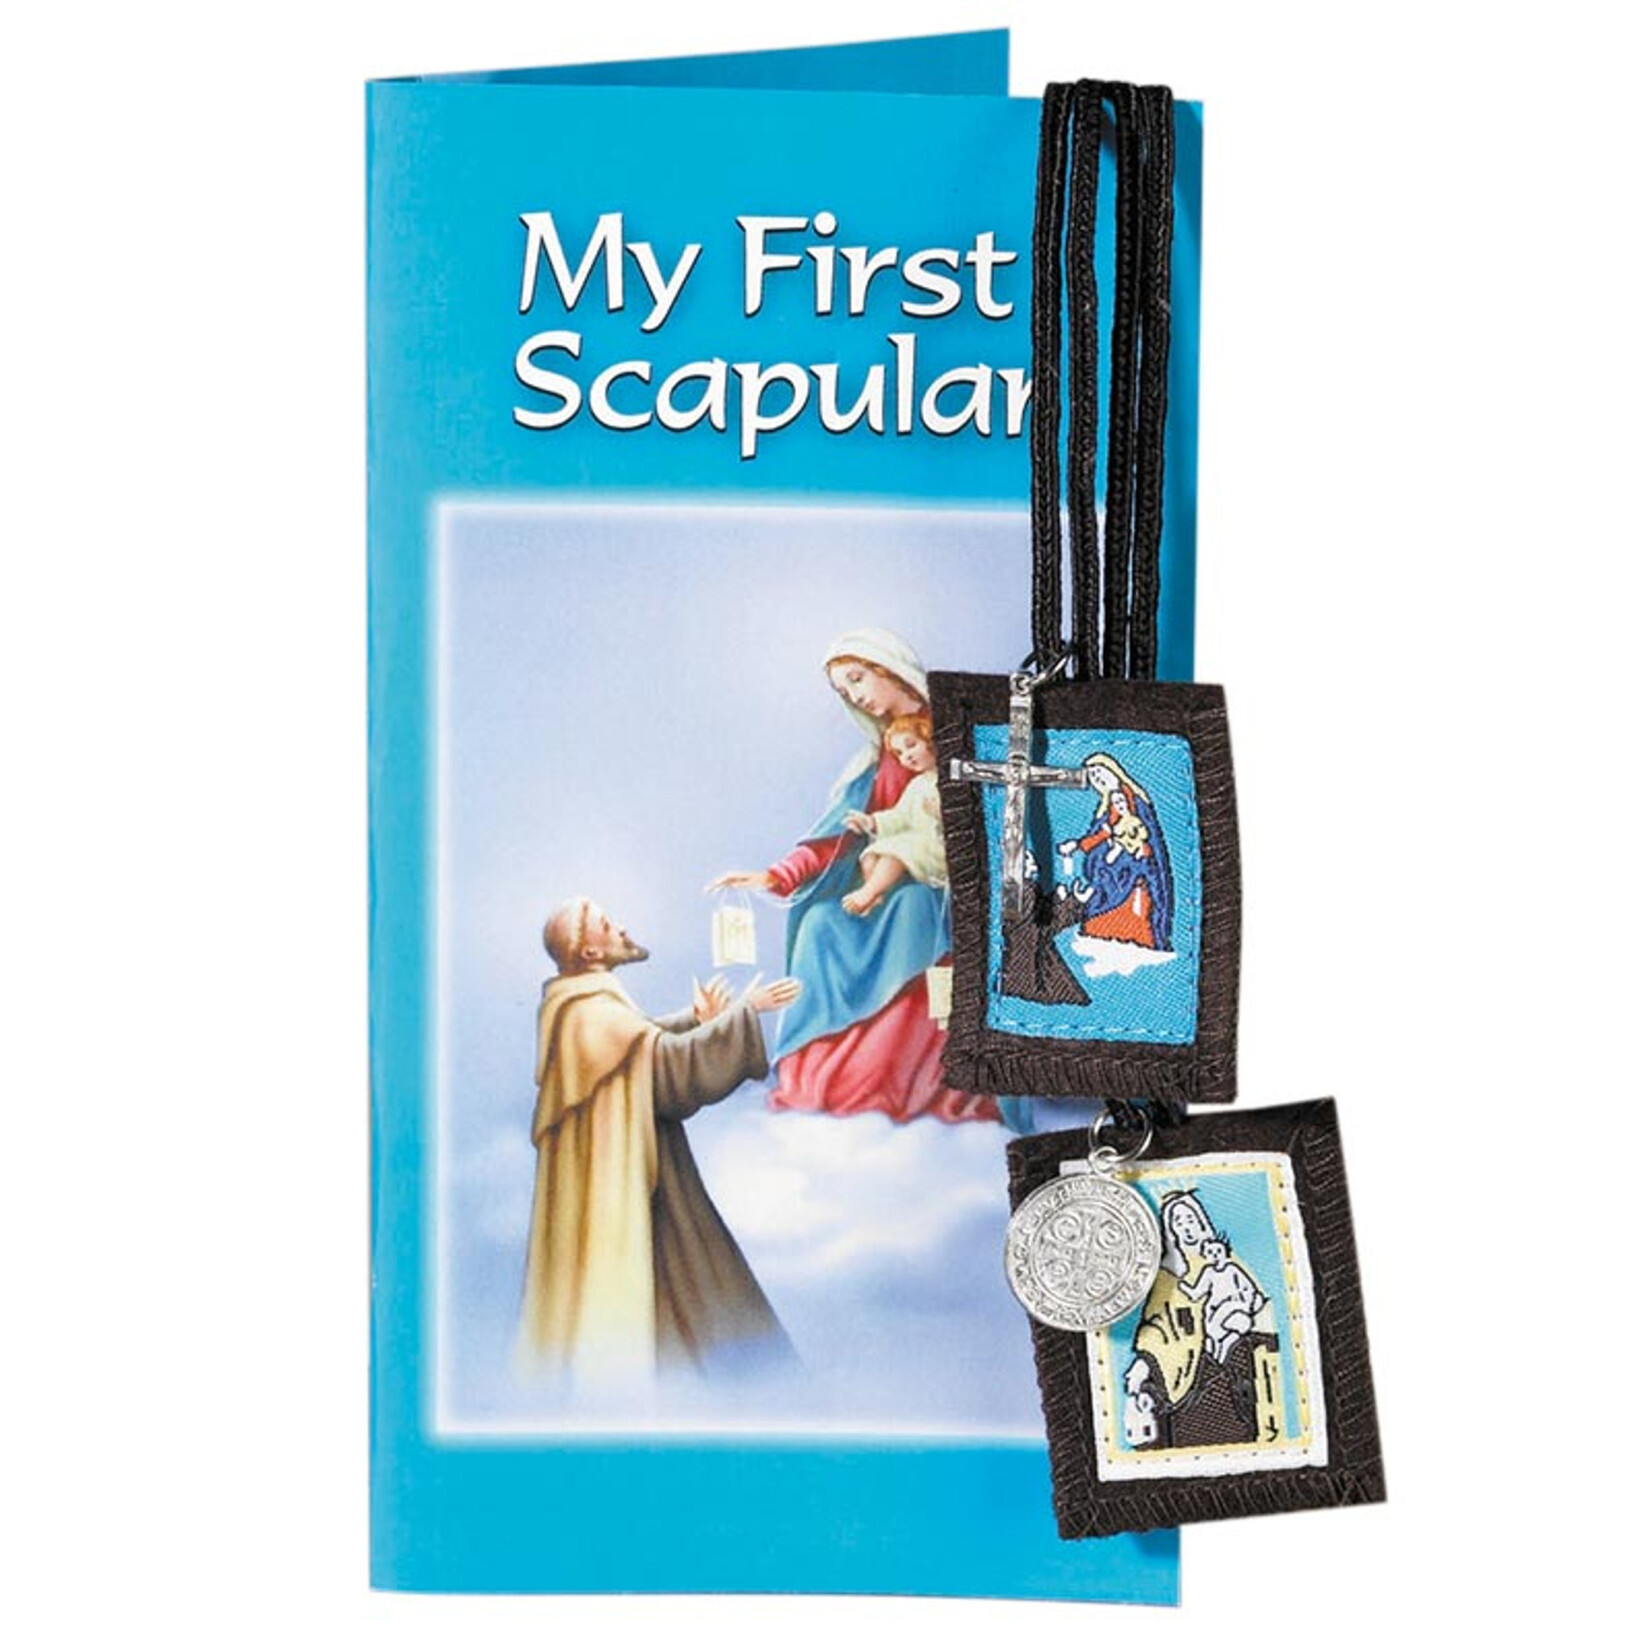 My First Scapular